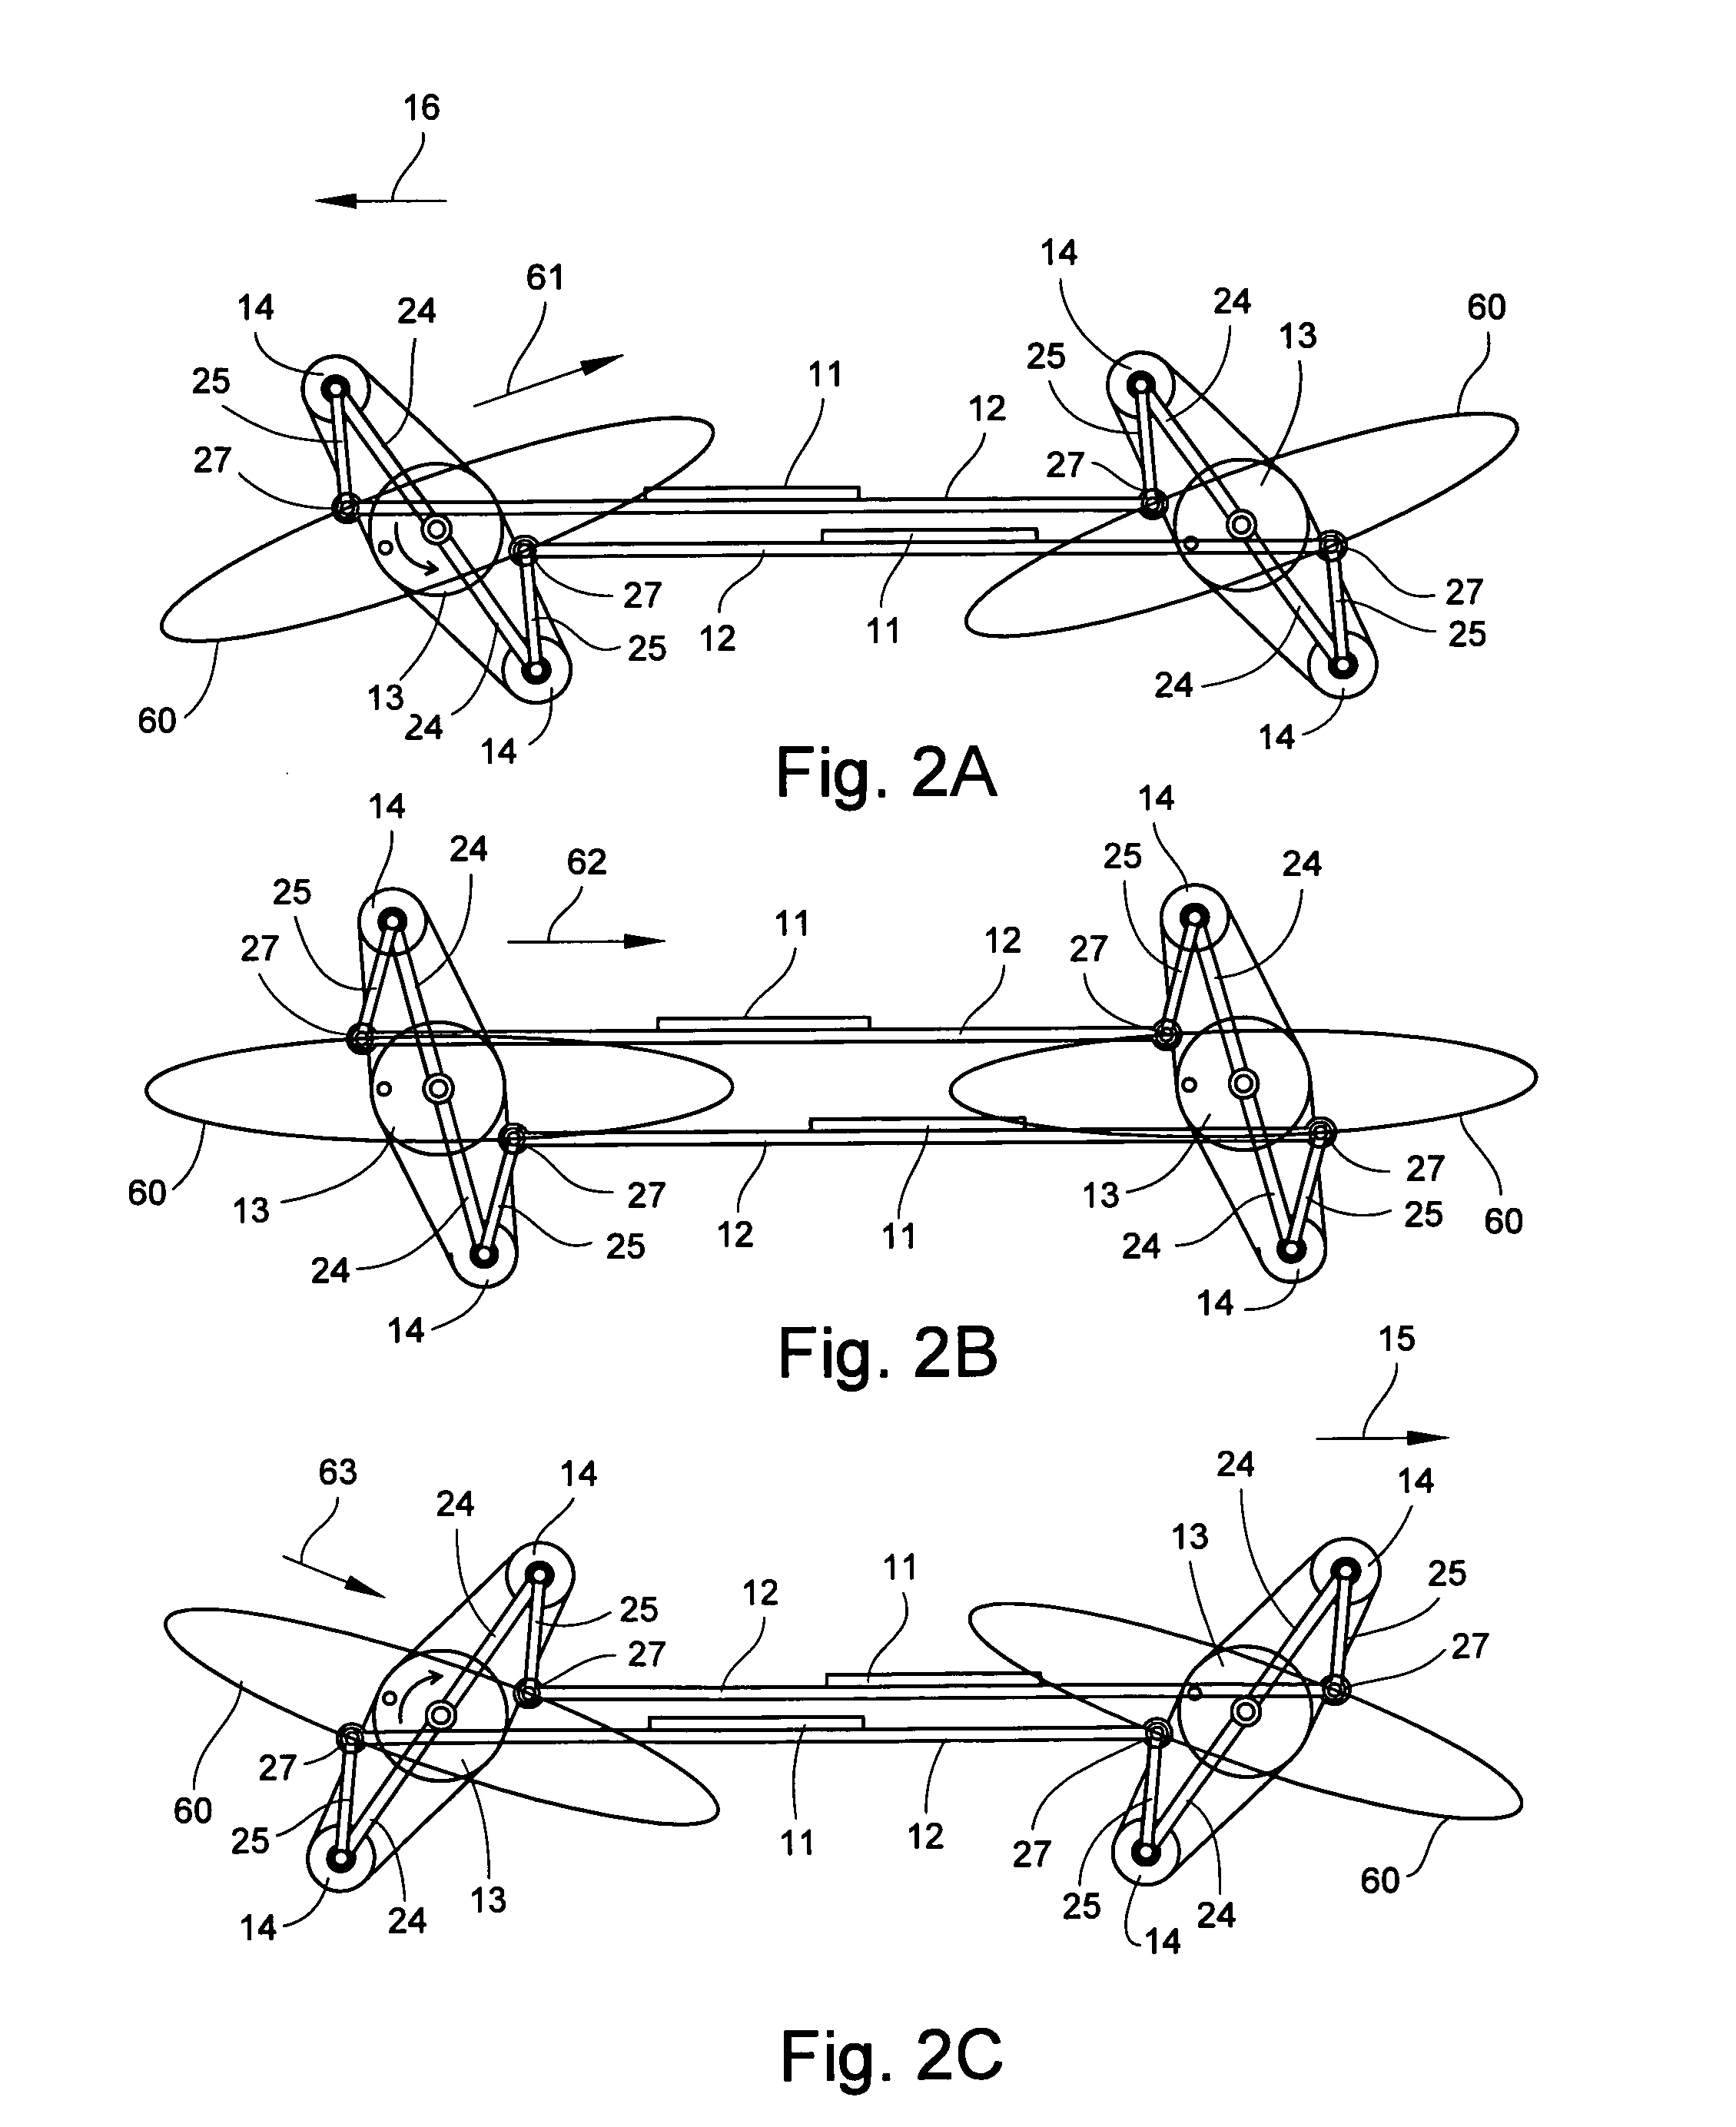 Elliptical exercise device and methods of use